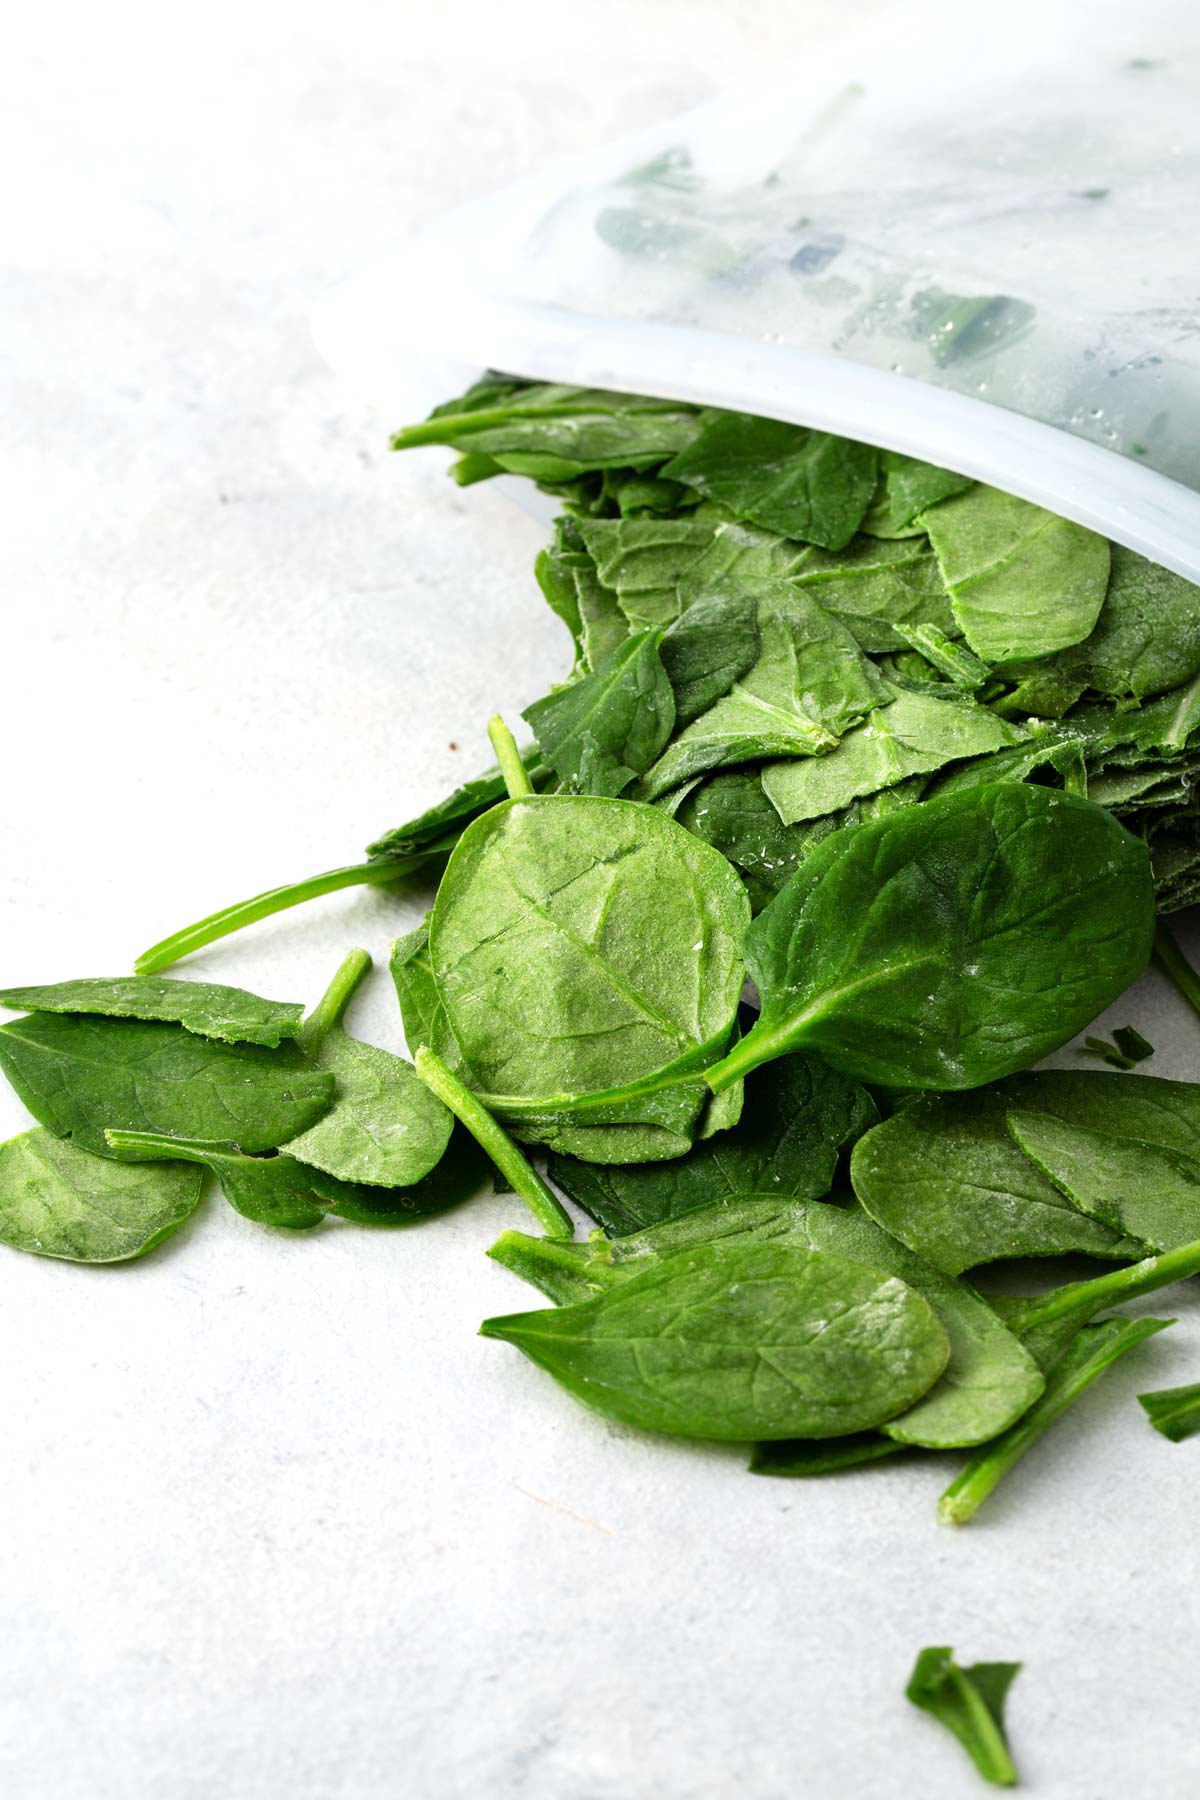 Frozen baby spinach on a gray table.